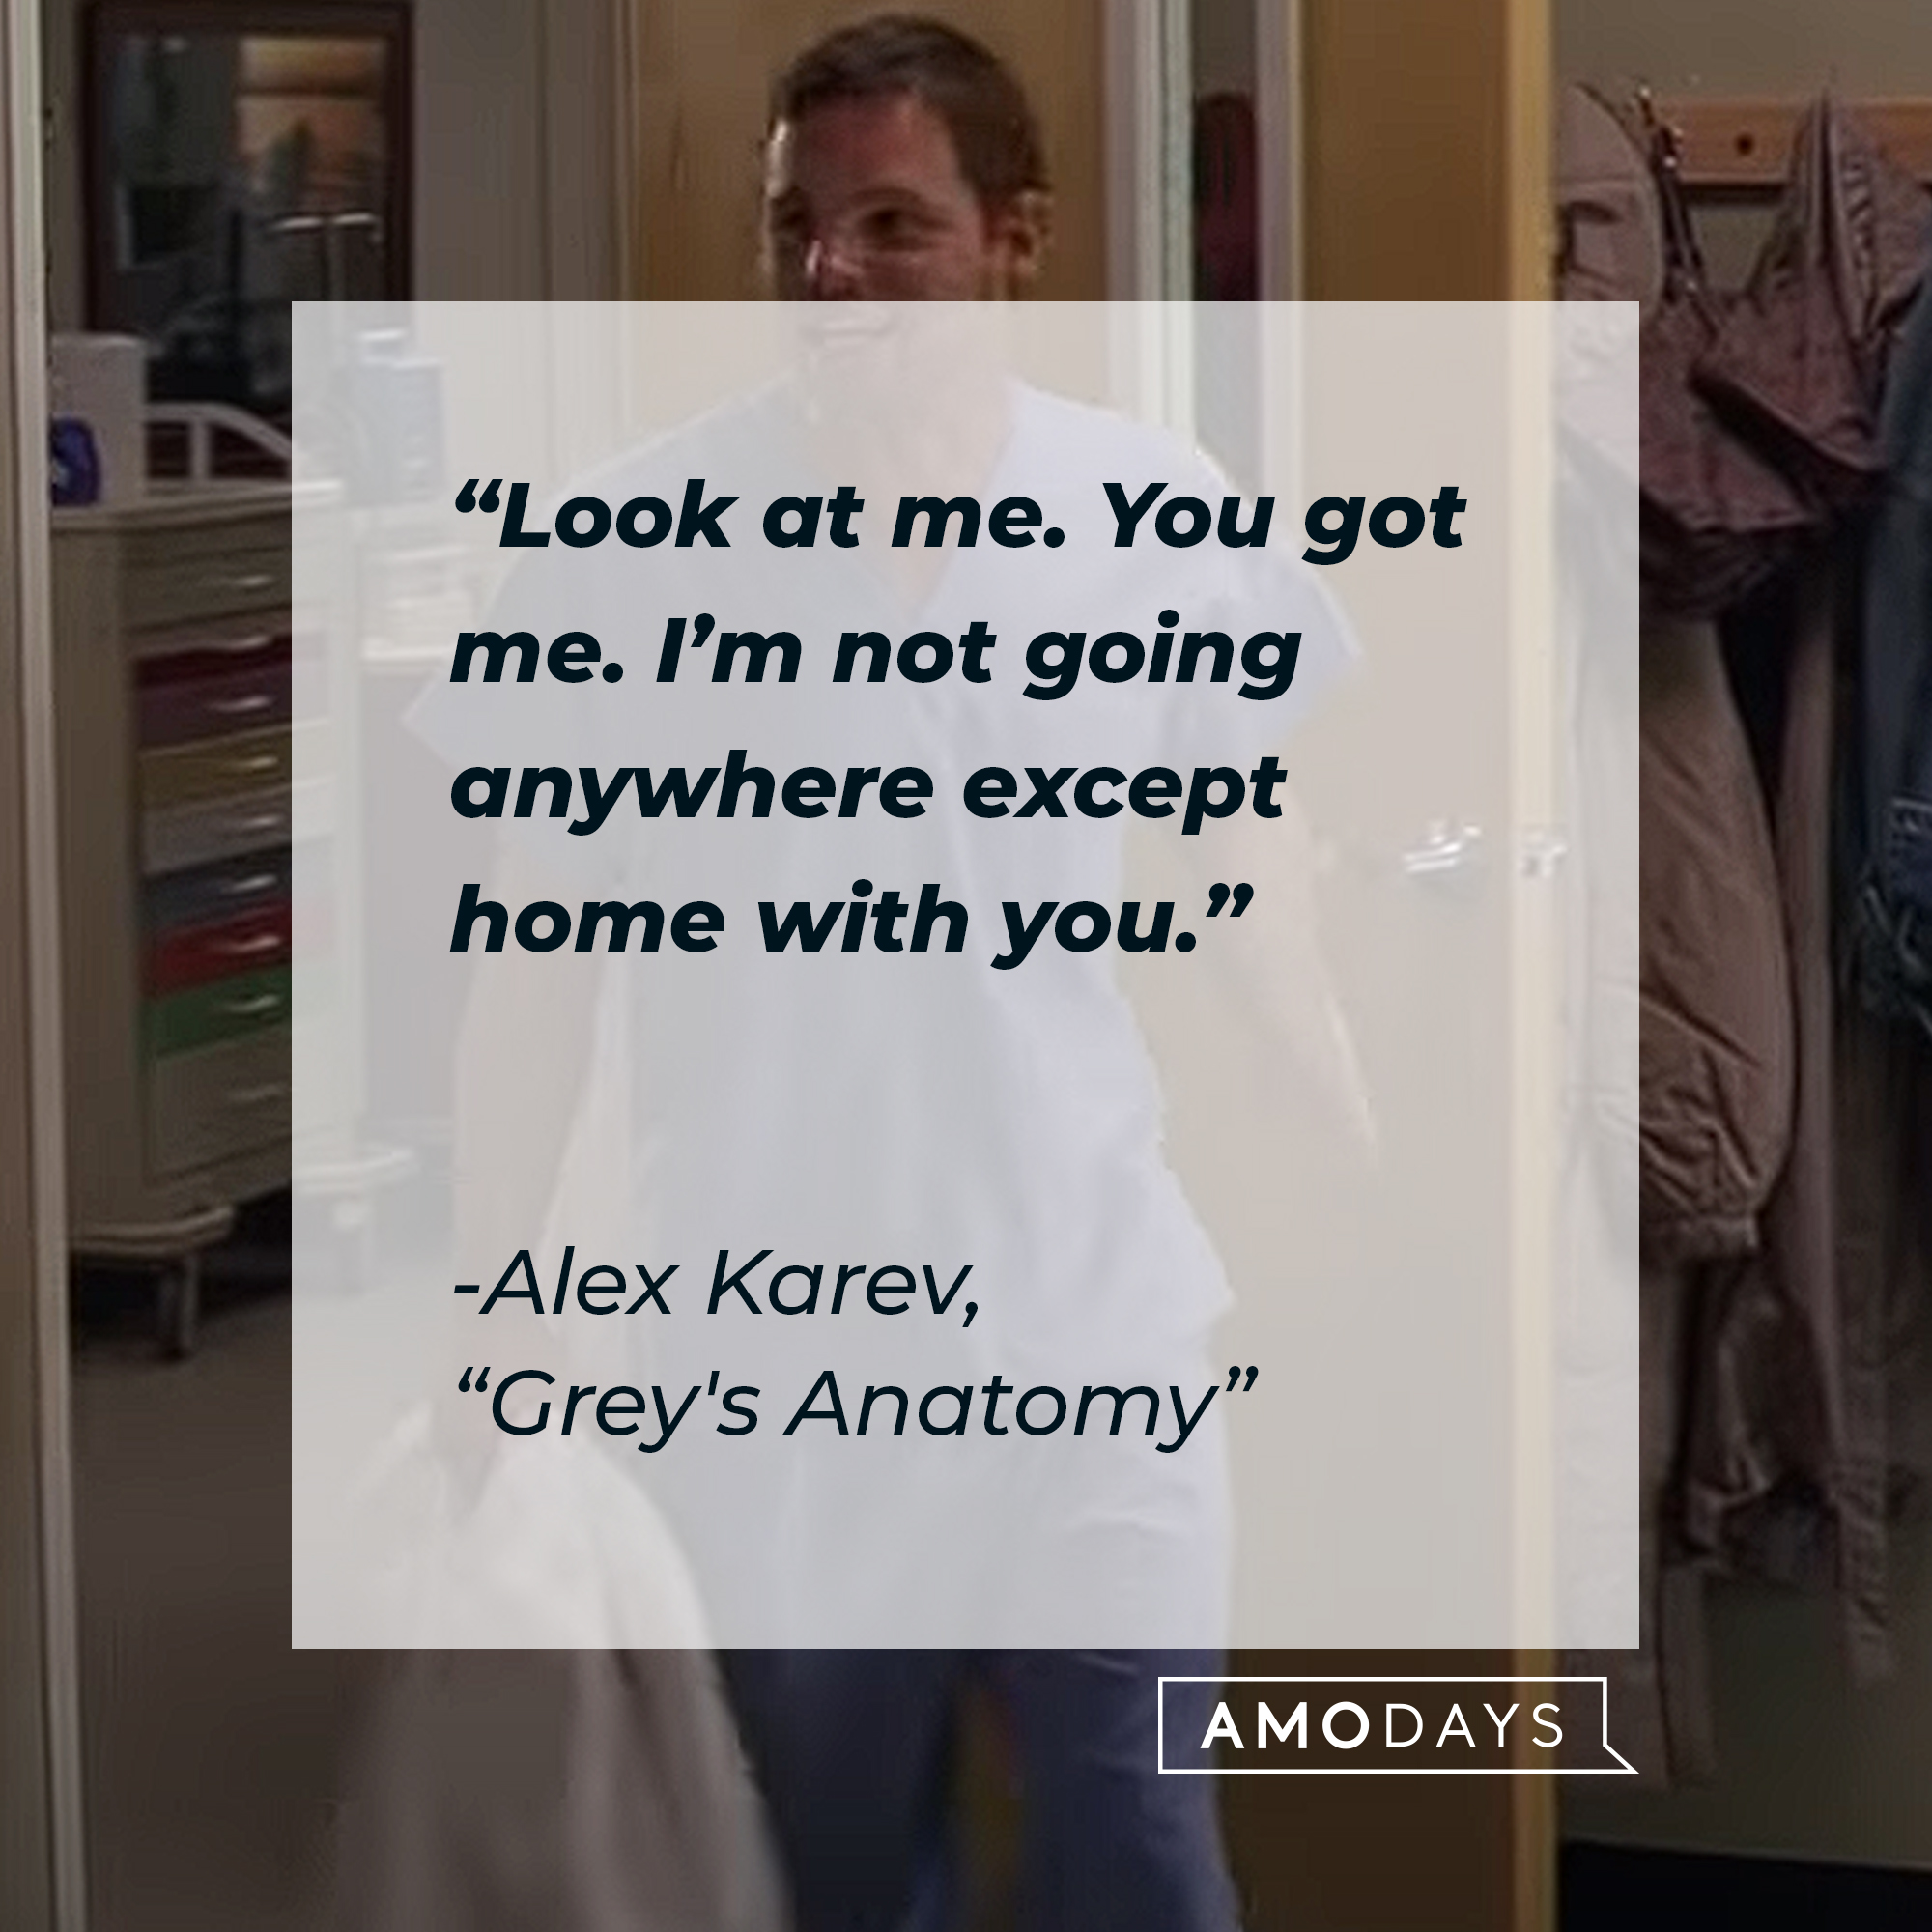 Alex Karev’s quote from “Grey’s Anatomy”: “Look at me. You got me. I’m not going anywhere except home with you.” | Source: youtube.com/ABCNetwork